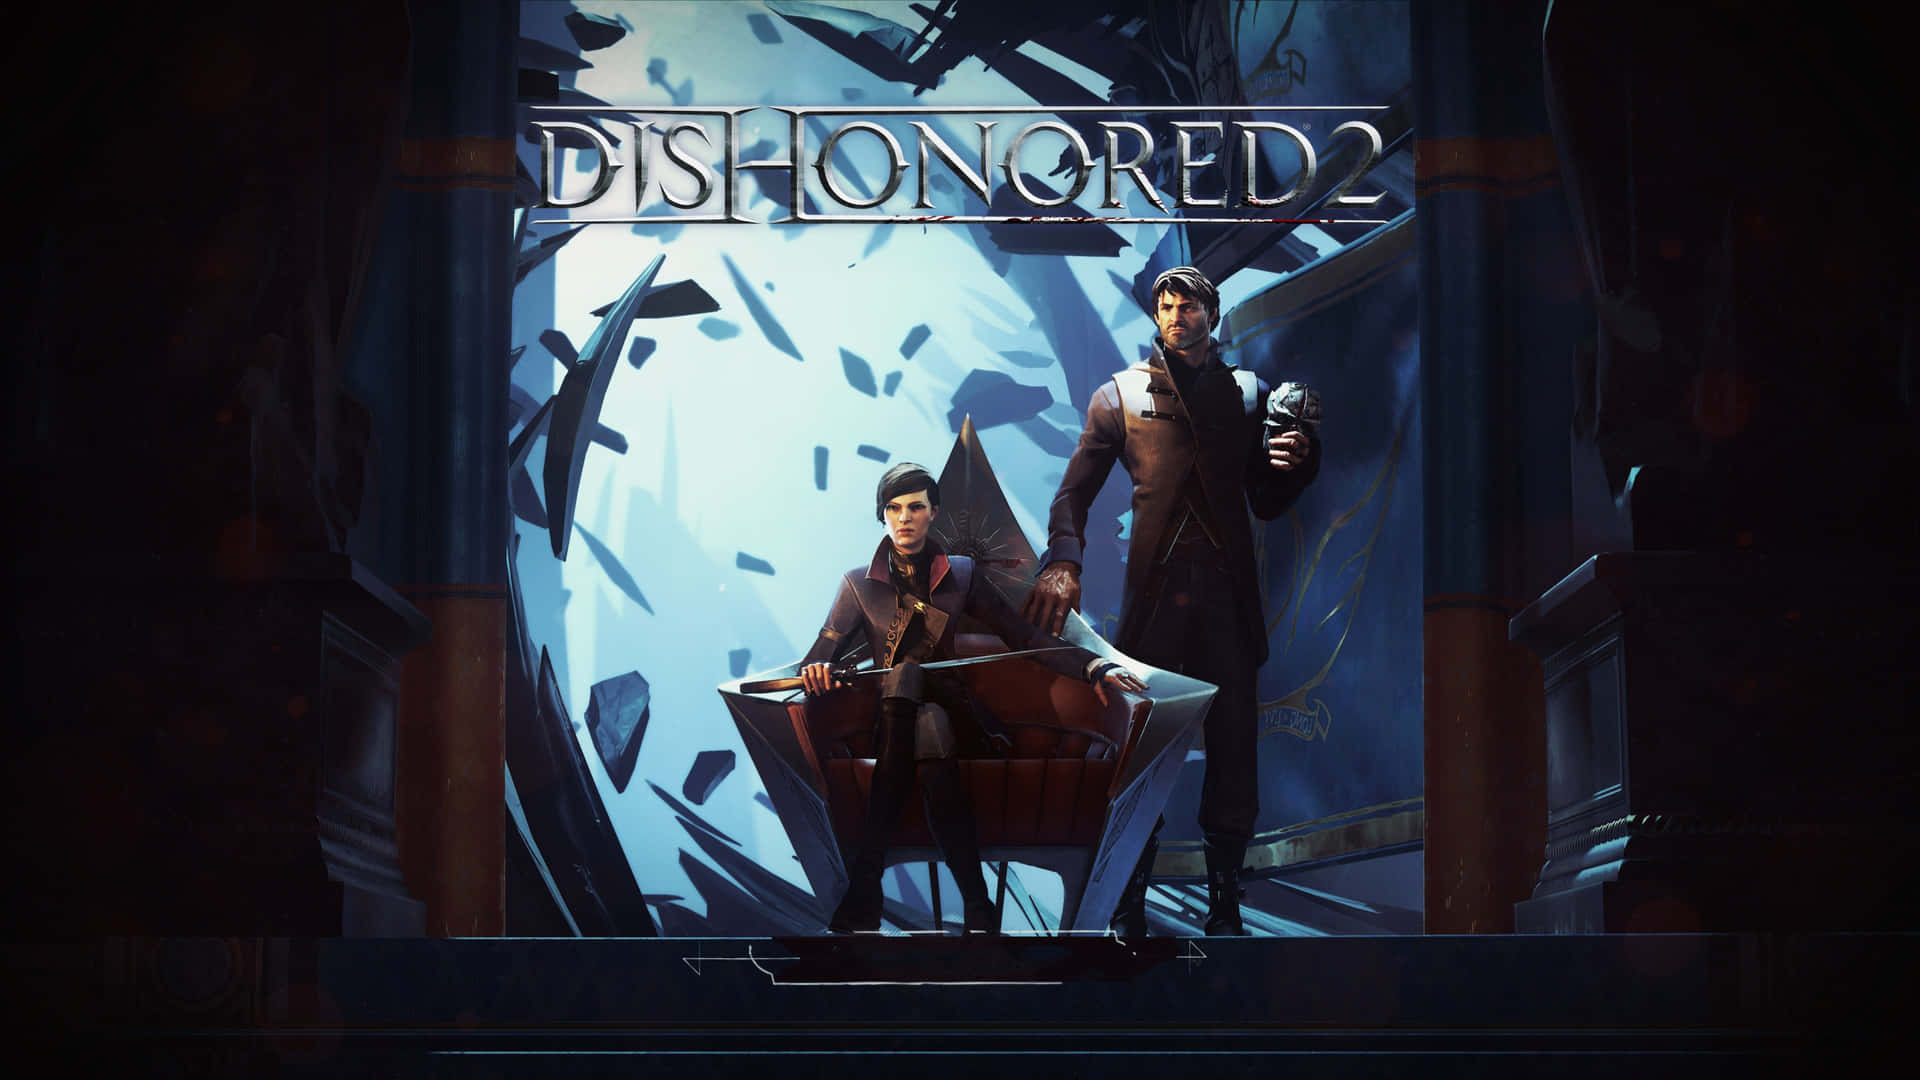 Dishonored 2 - Pc - Pc - Pc - Pc - Pc Wallpaper